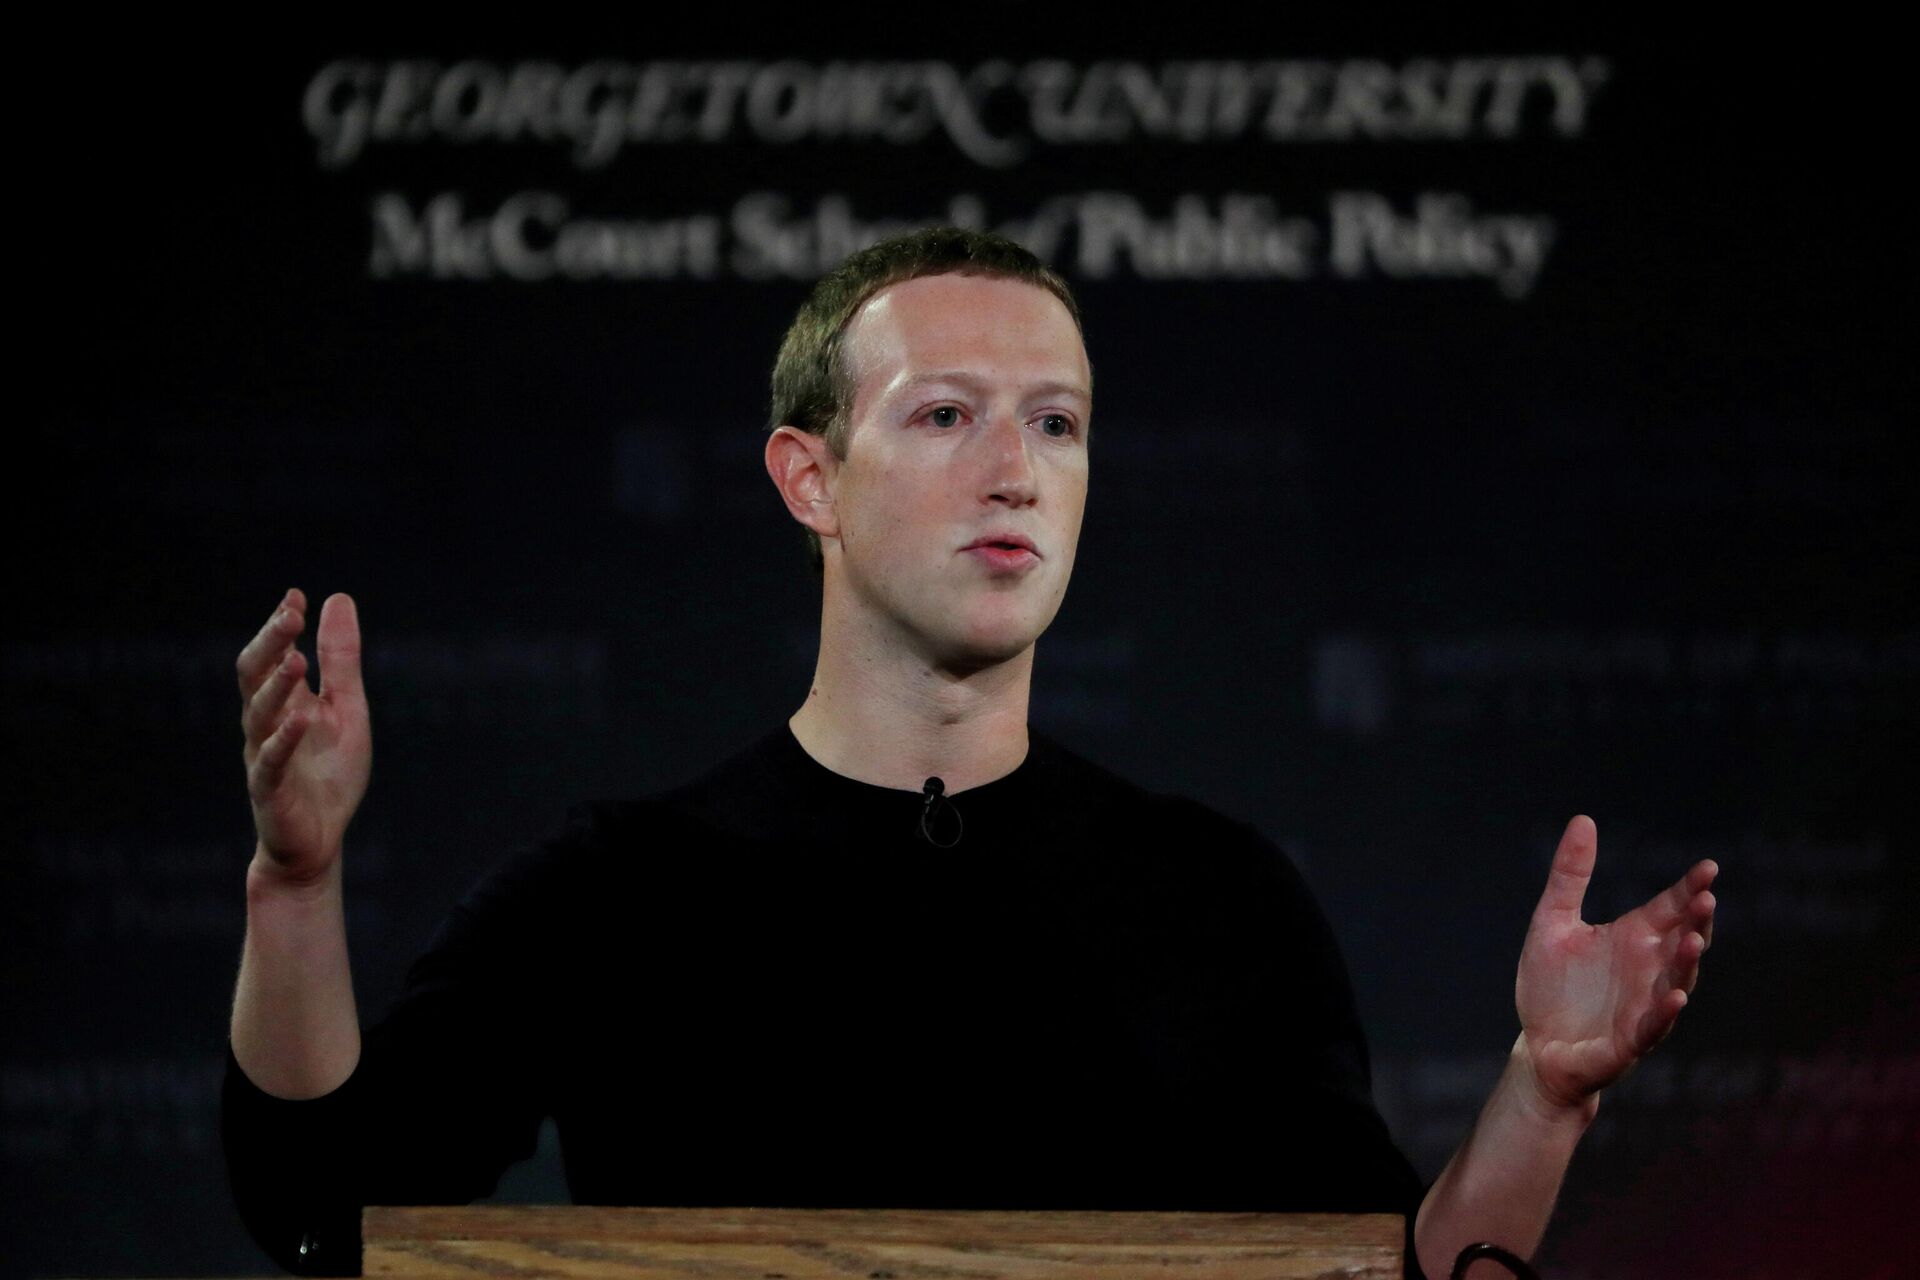 Facebook Chairman and CEO Mark Zuckerberg addresses the audience on the challenges of protecting free speech while combating hate speech online, fighting misinformation, and political data privacy and security, at a forum hosted by Georgetown University's Institute of Politics and Public Service (GU Politics) and the McCourt School of Public Policy in Washington, U.S., October 17, 2019 - Sputnik International, 1920, 26.10.2021